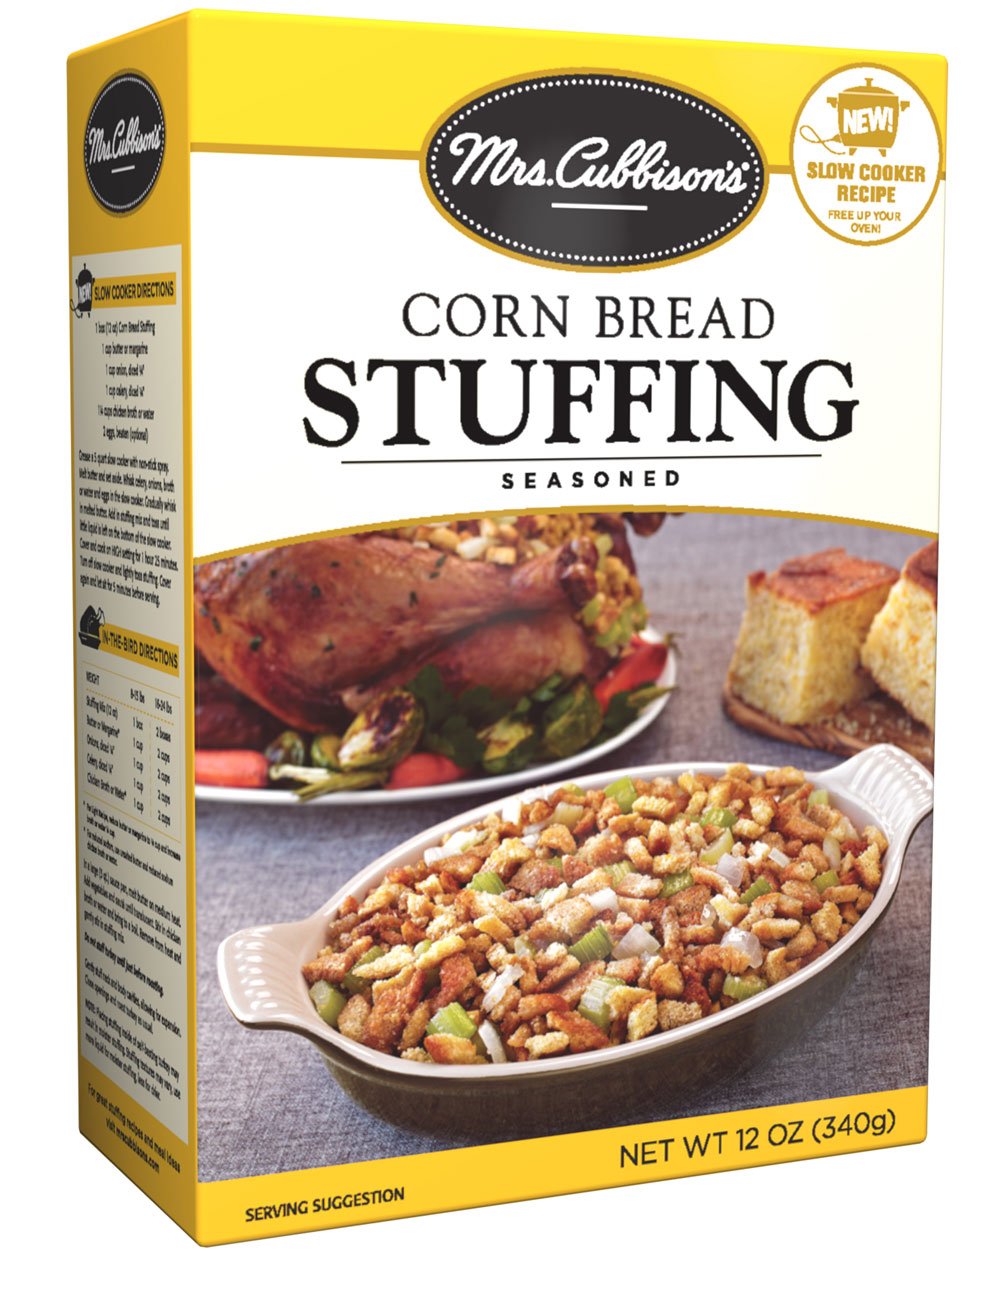 How to make Stove-Top Stuffing in the Slow Cooker - The Magical Slow Cooker